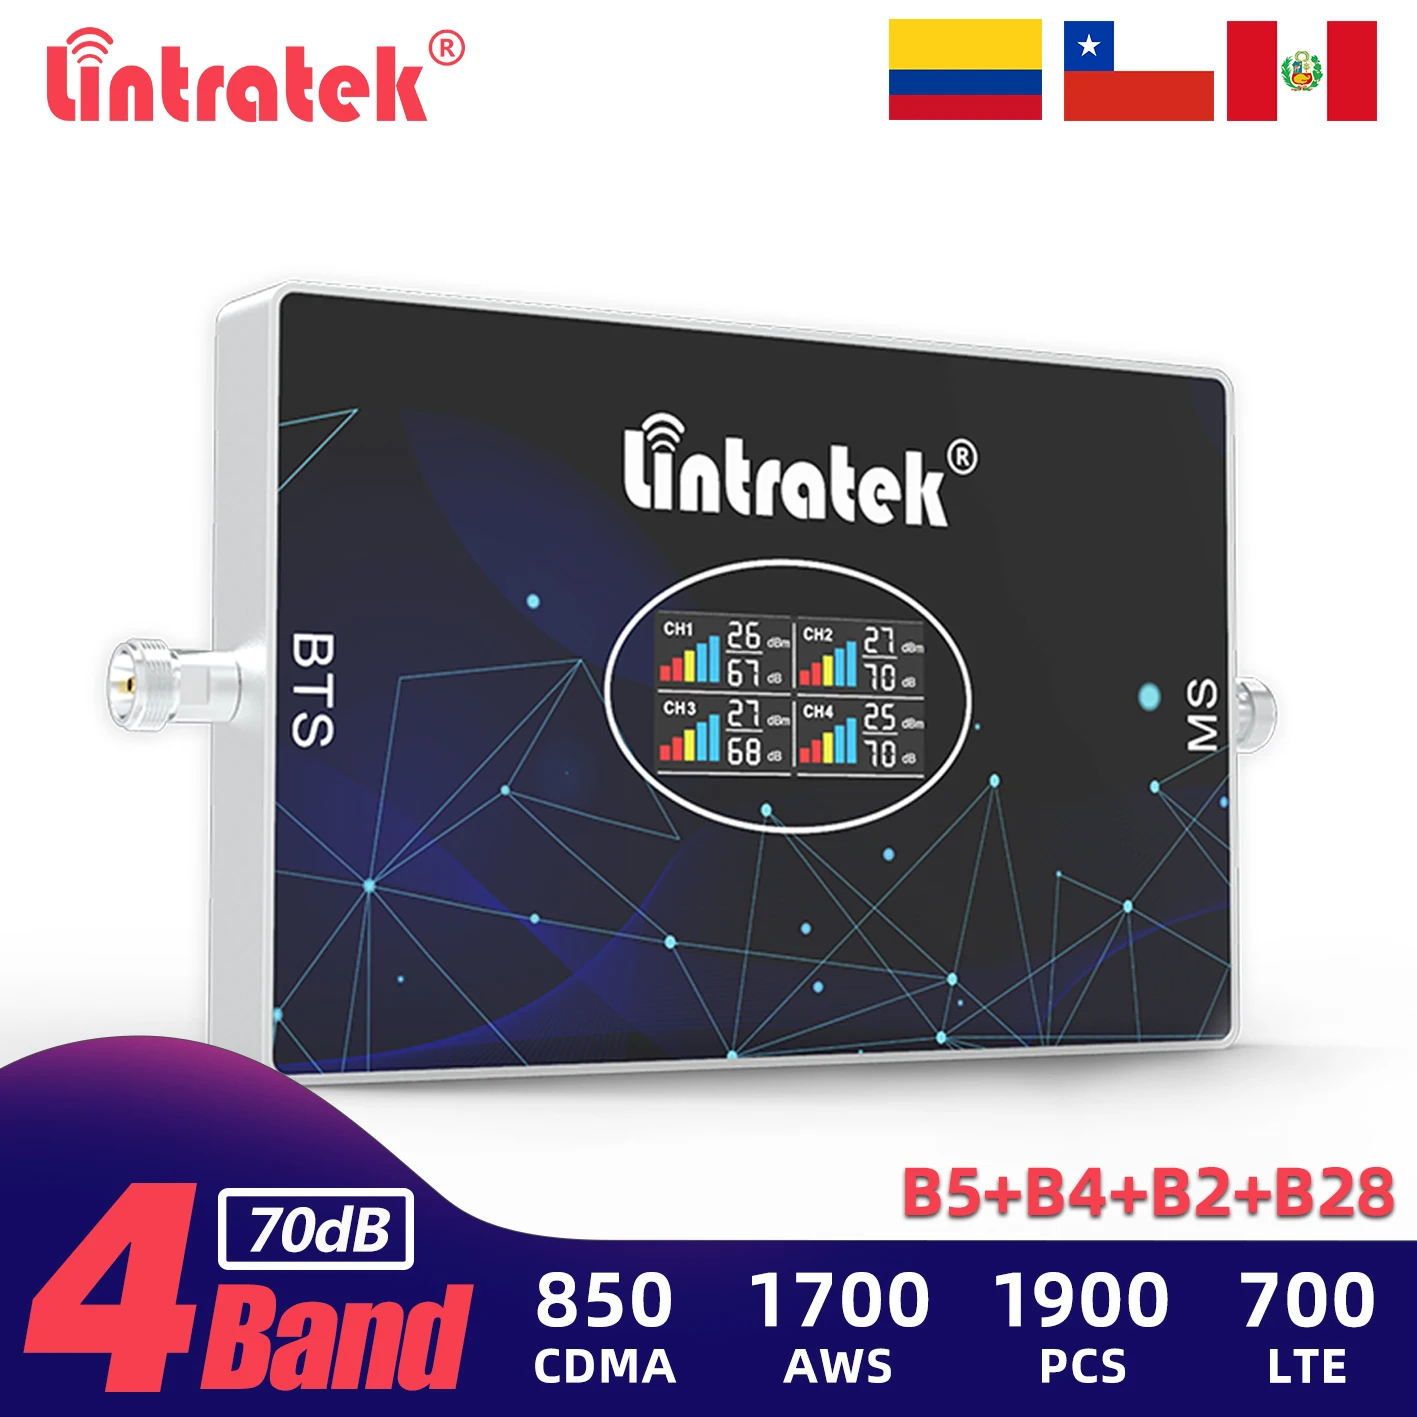 Lintratek Four-Band Signal Repeater 850 700 1900 1700 Band 28 Cellular Booster 2G GSM 3G 4G LTE Cell Phone Network Amplifier goboost cell phone signal booster 2g 3g gsm 850 umts 2100 lte 1700 1800 1900 mhz cellular amplifier dual band repeater